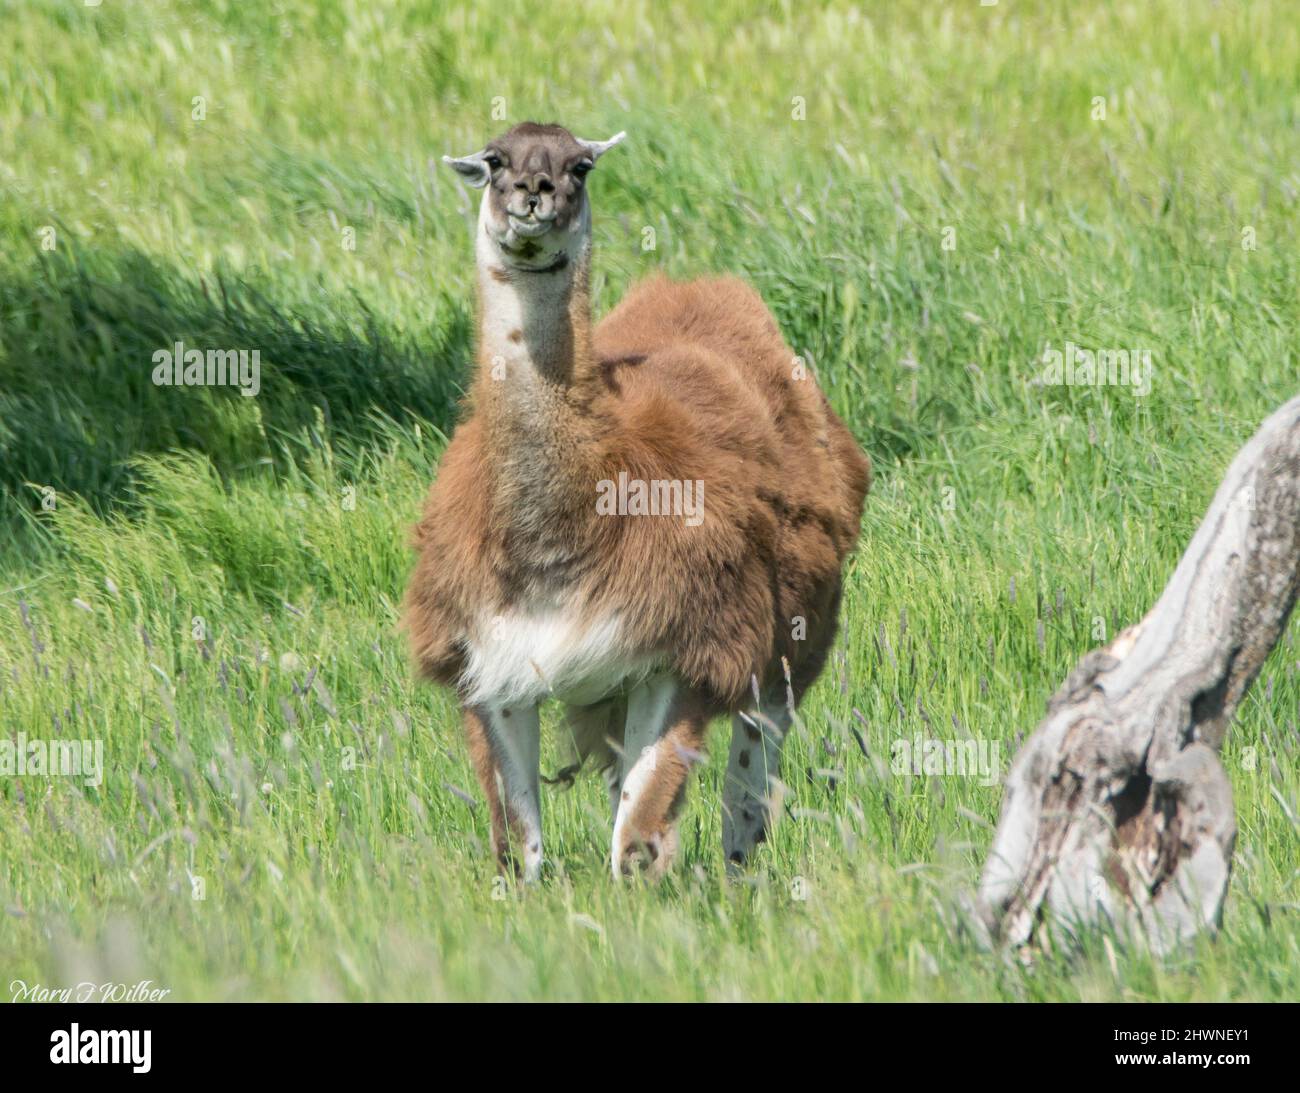 Llama with ears down standing in a field. Stock Photo